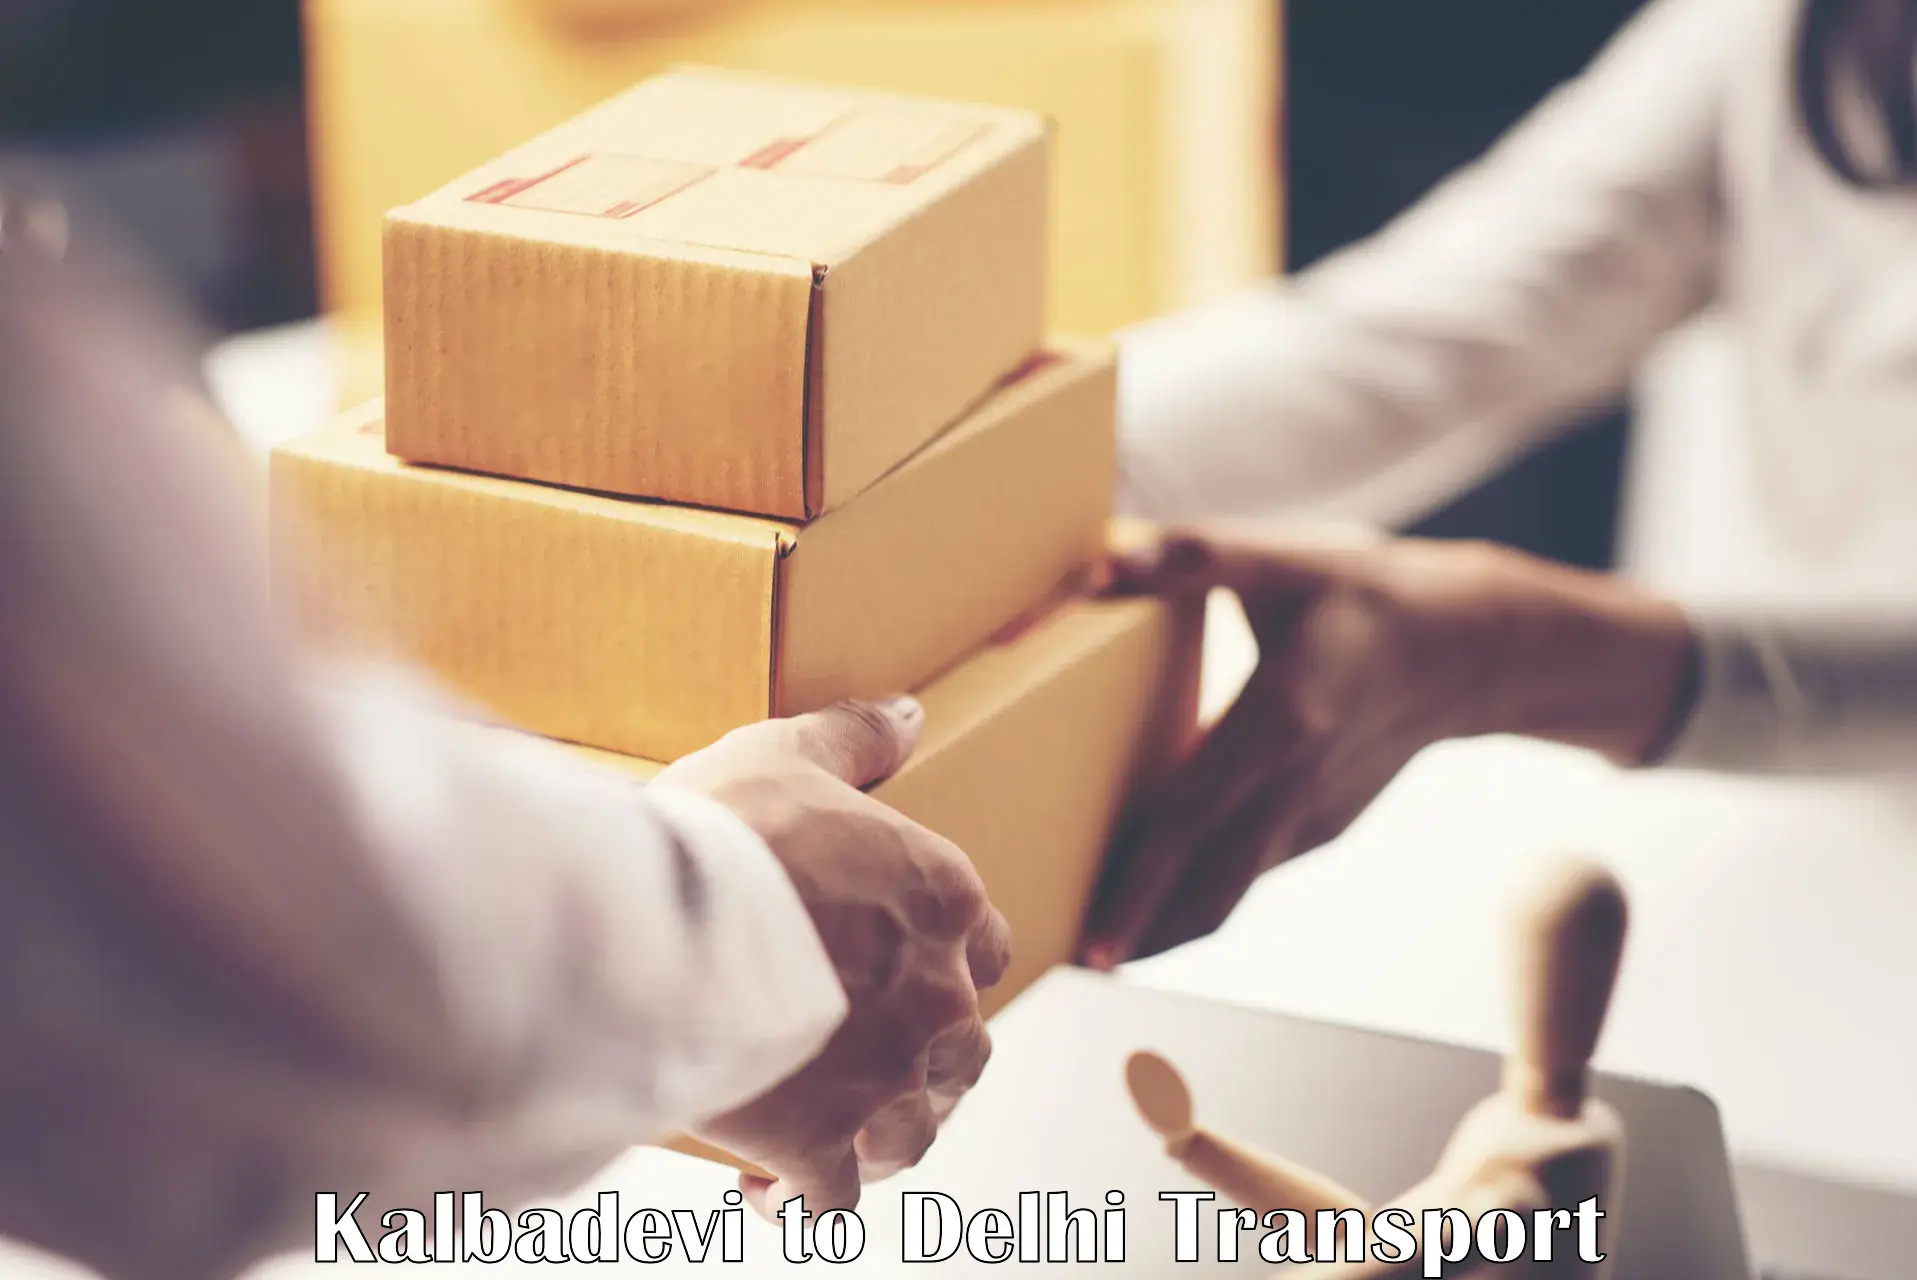 Shipping services Kalbadevi to Lodhi Road